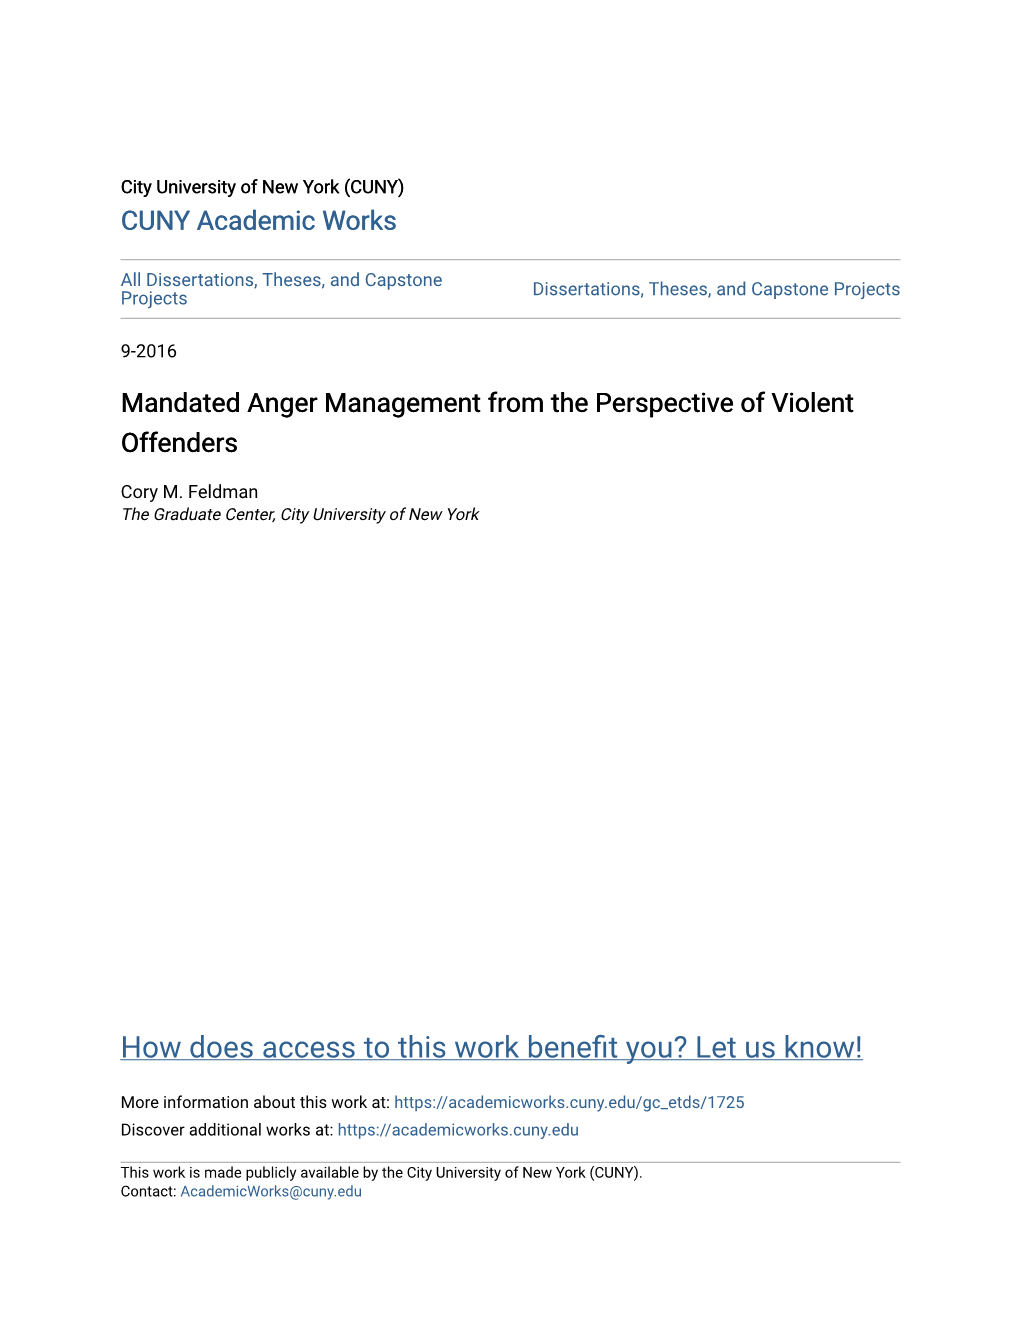 Mandated Anger Management from the Perspective of Violent Offenders